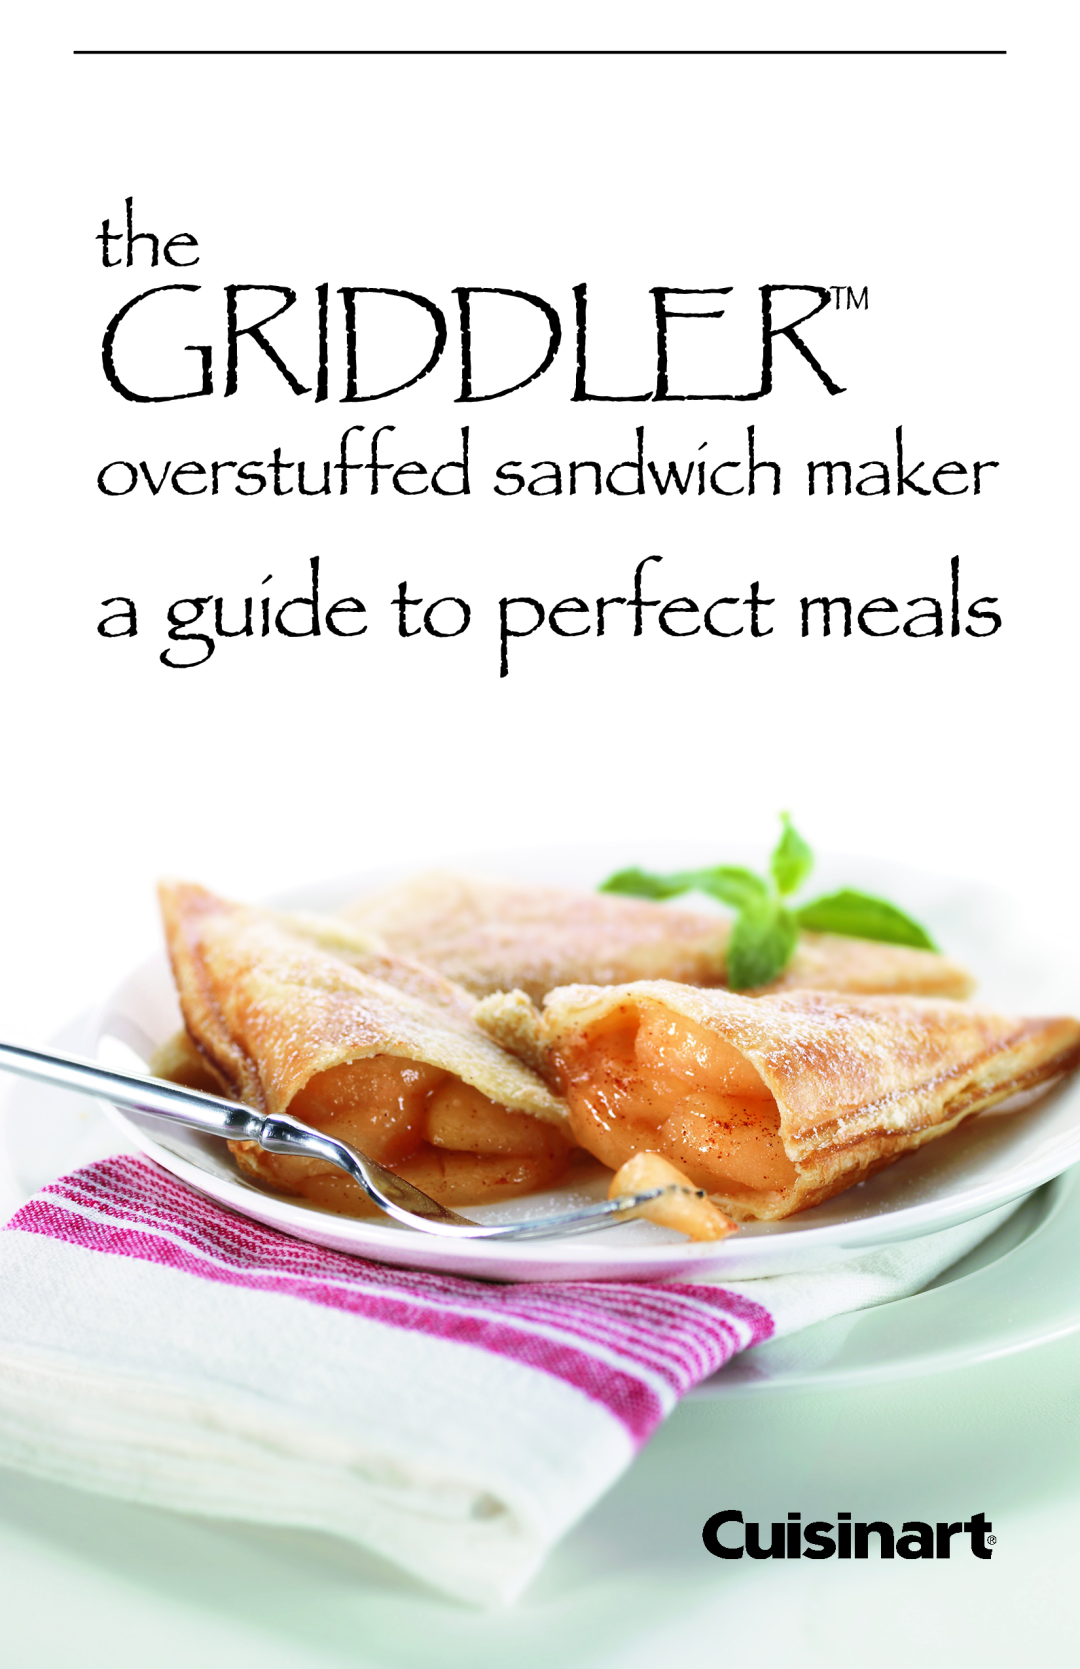 Cuisinart CGR-SMC manual Griddle R, a guide to perfect meals, overstuffed sandwich maker 